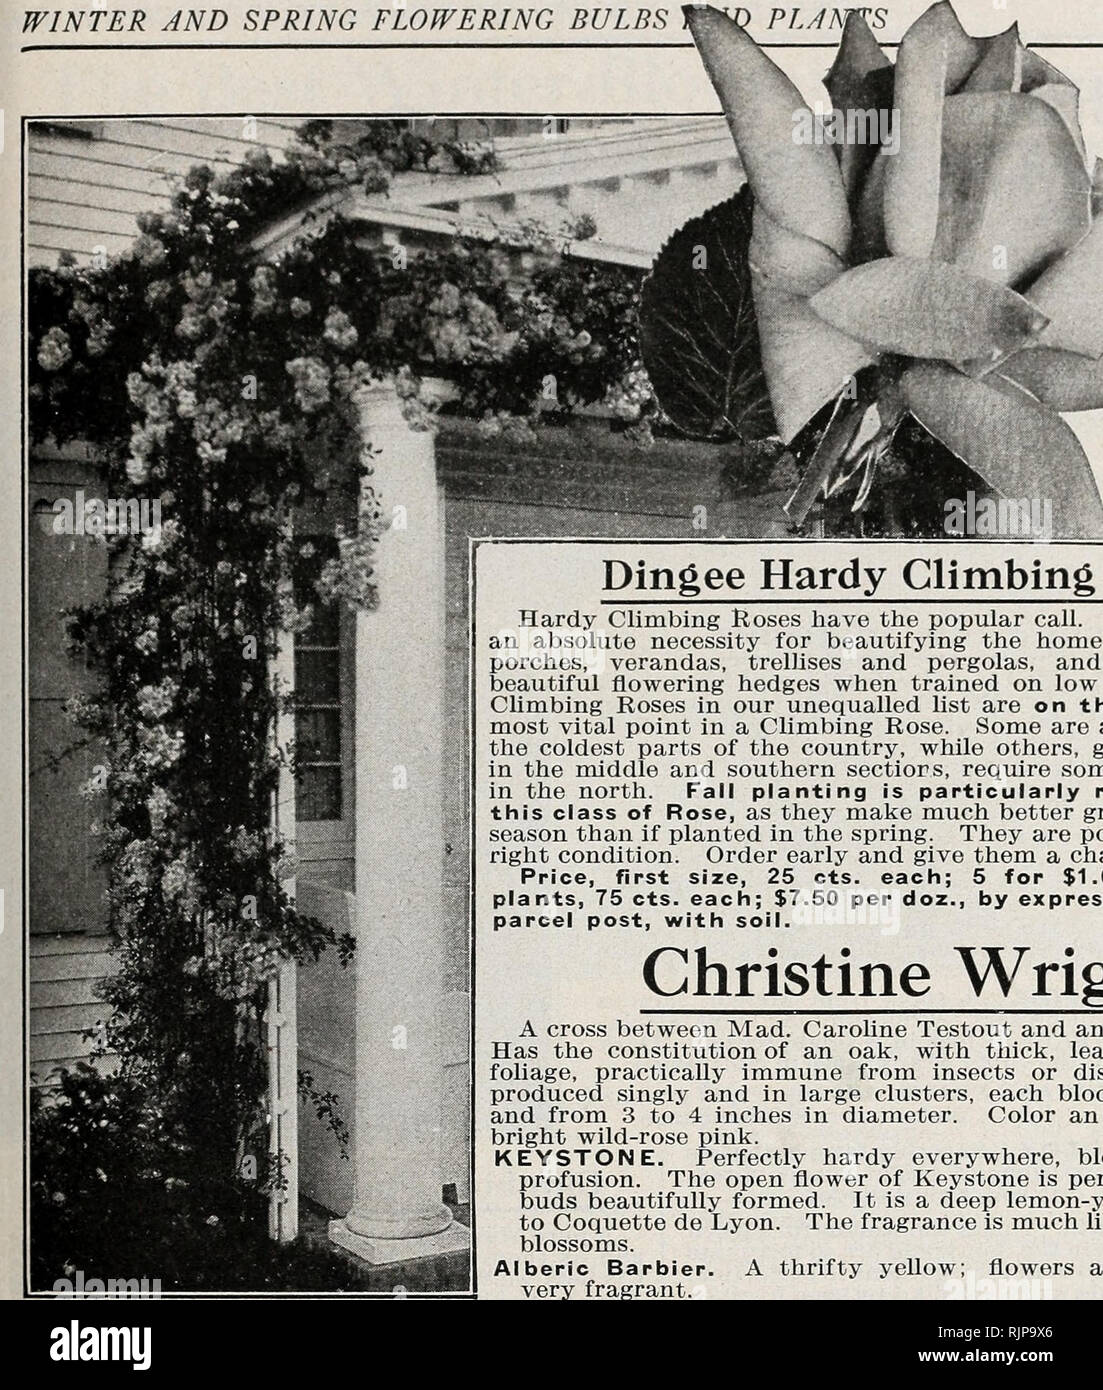 . Autumn edition 1925 : our new guide to rose culture. WINTER AND SPRING FLOWERING BULBS W*D PL/IN. 25 Christine Wright American Pillar. Produce a profusion of pretty pink flowers, dark green foliage. Climbing Killarney. Produce beautiful blooms, identical with the bush Killarney. Triumphant. Deep rose, changing to pale car- mine, shaded and variegated. Tausendschon or Thousand Beauties. One of the most beautiful climbing Roses in existence. Colors run from delicate balsam to bright rose and carmine. White Dorothy Perkins. A very rampant grower. Flowers are brilliant, glistening white, product Stock Photo